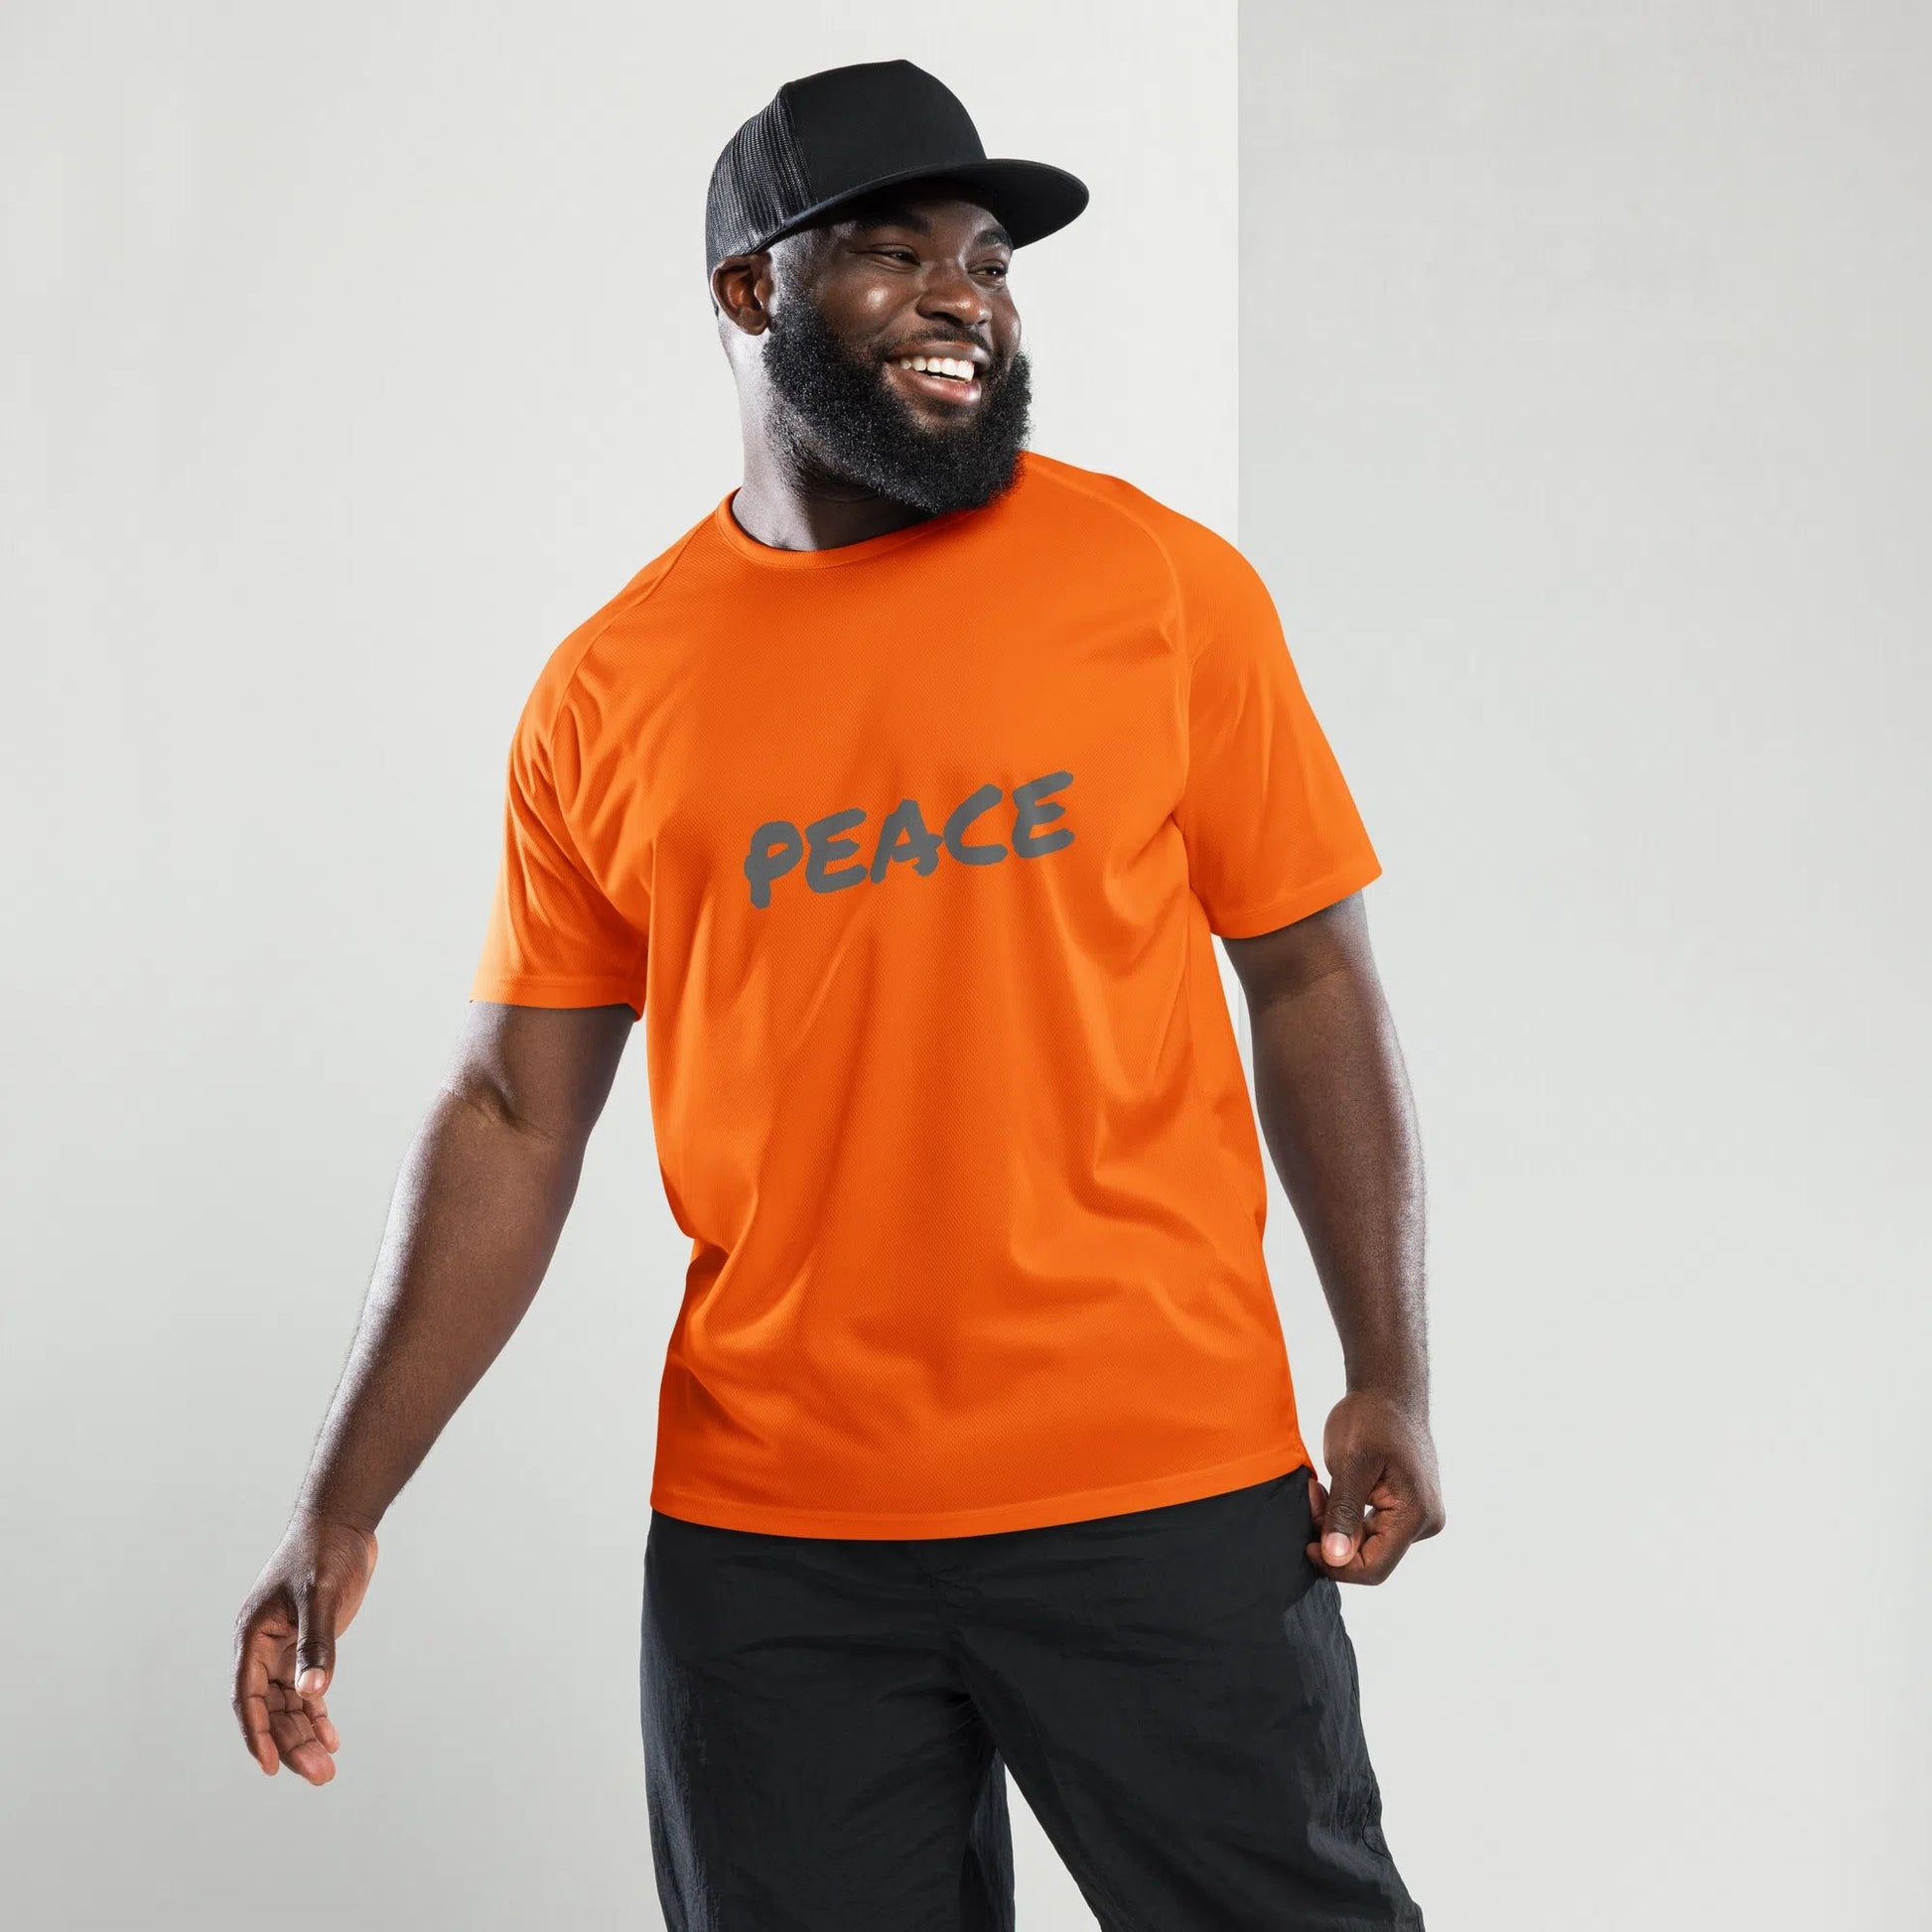 Men's Performance Sports Jersey - Breathable and Durable for All Your Athletic Needs